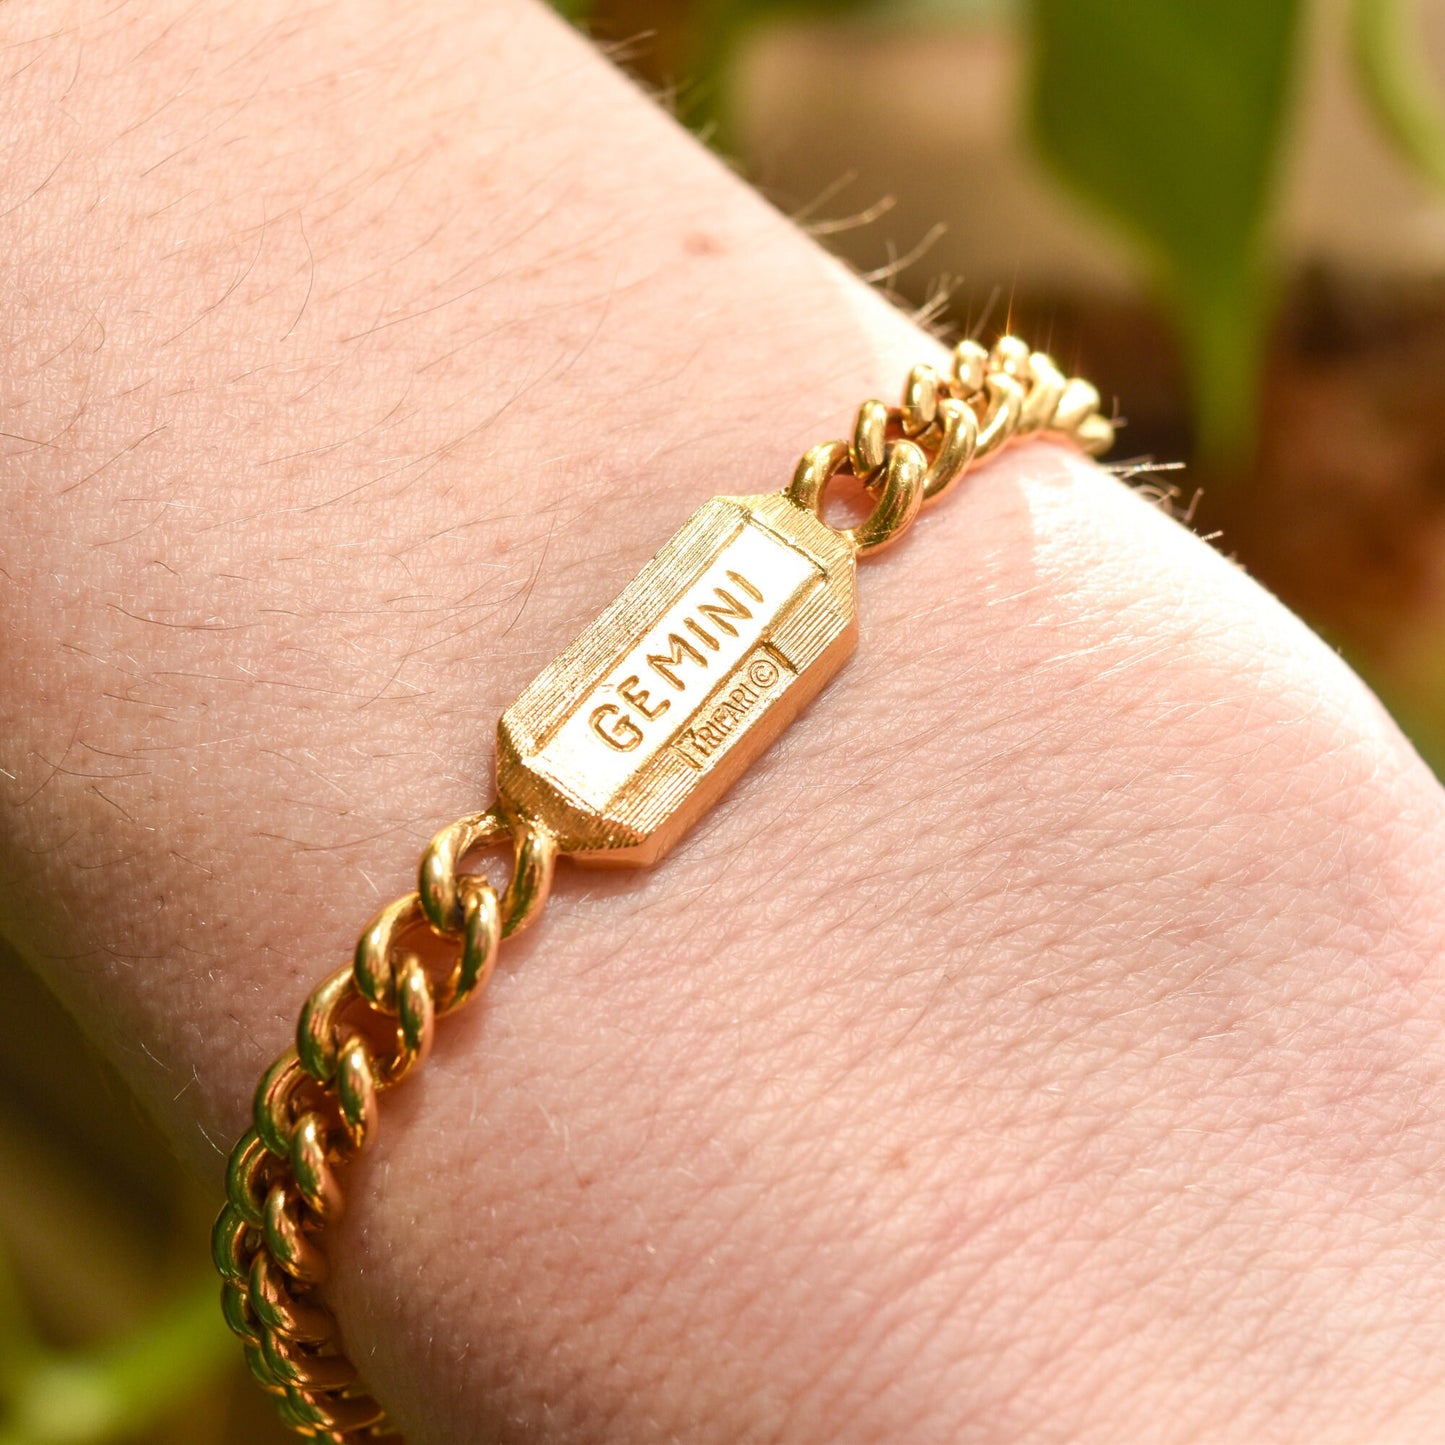 Gold-tone vintage Trifari bracelet with Gemini zodiac sign on hexagonal charm, featuring a 5mm curb link chain, astrology-themed jewelry, worn on wrist, with a length of 7 inches.